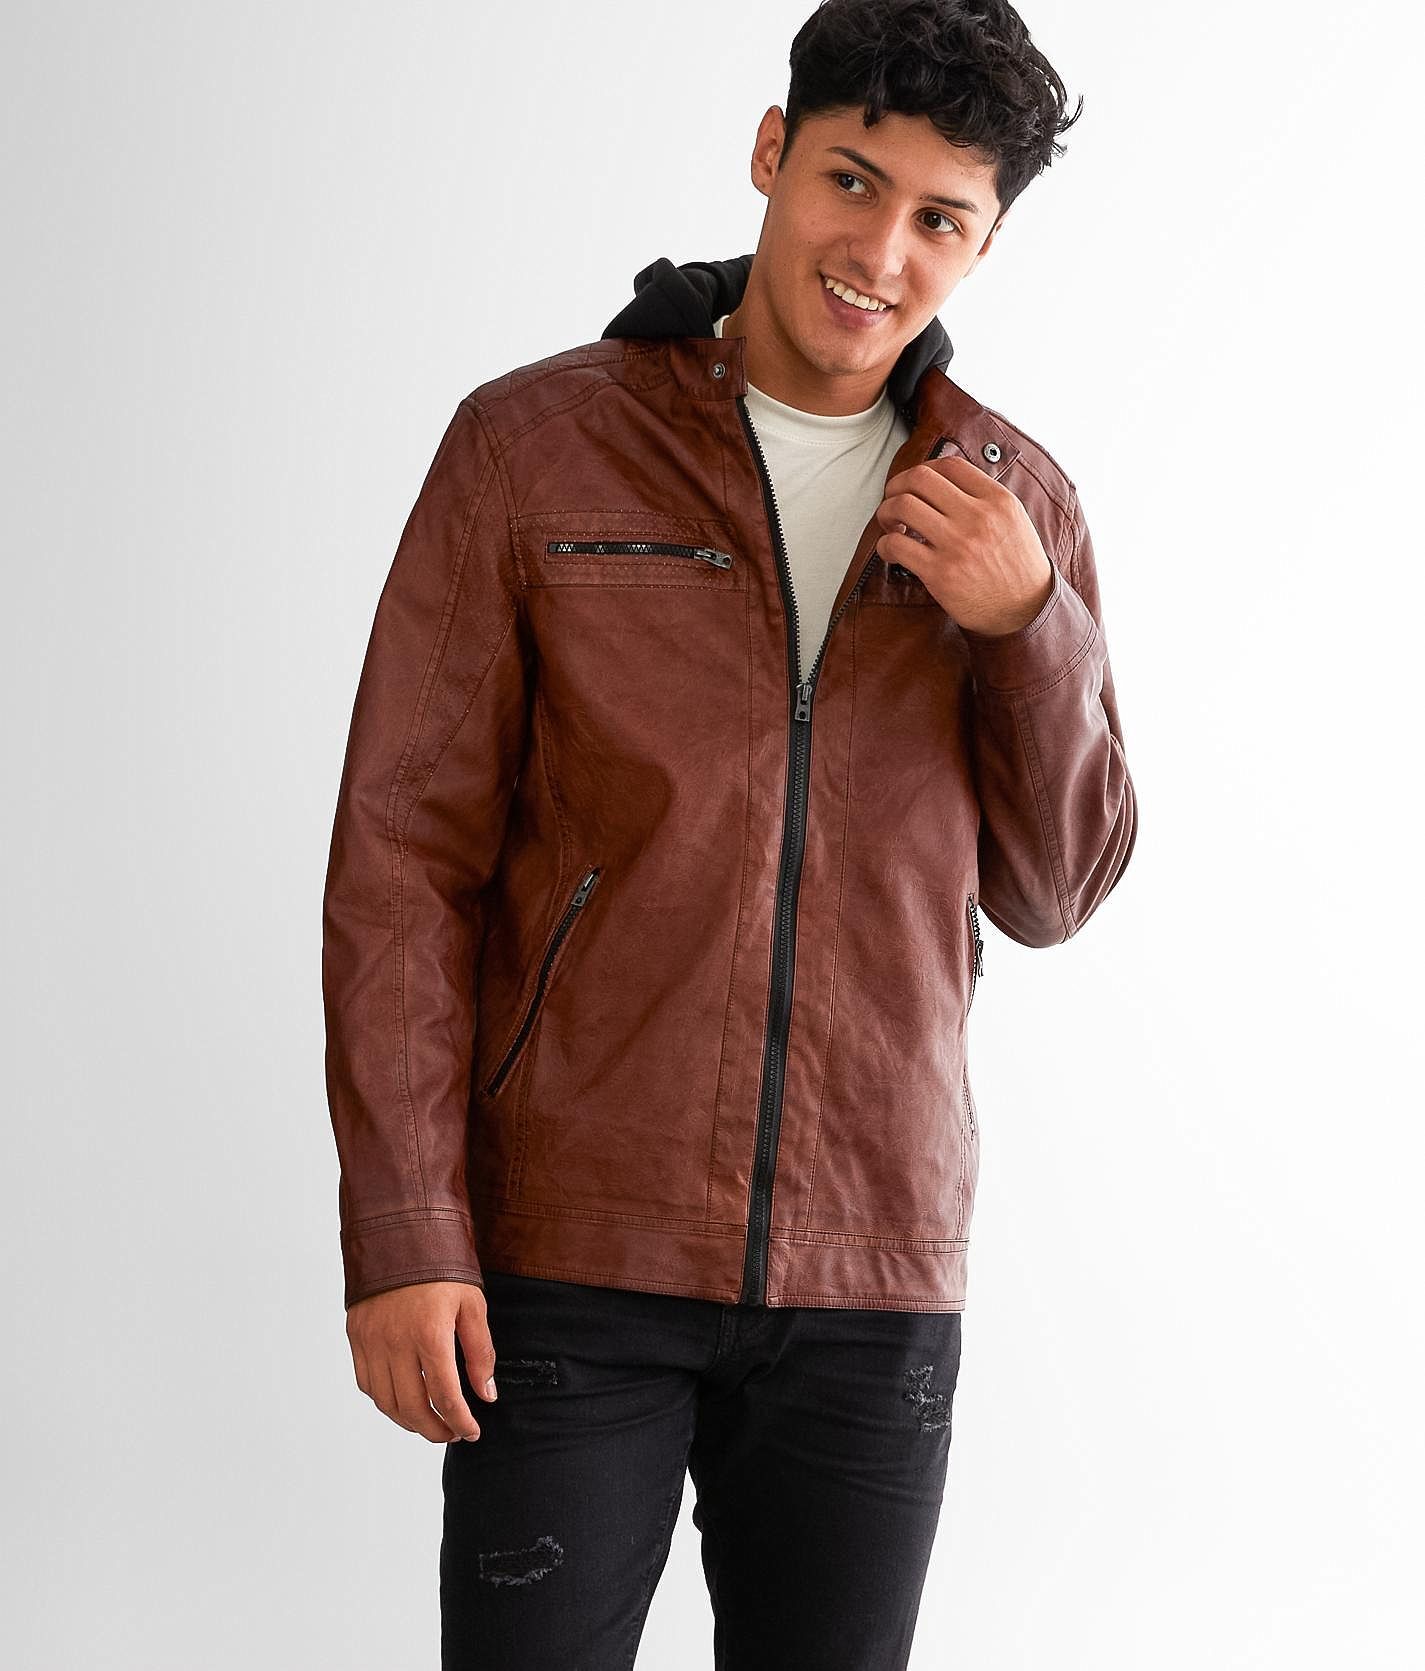 Buckle Black Hooded Faux Leather Jacket  - Brown - male - Size: Medium